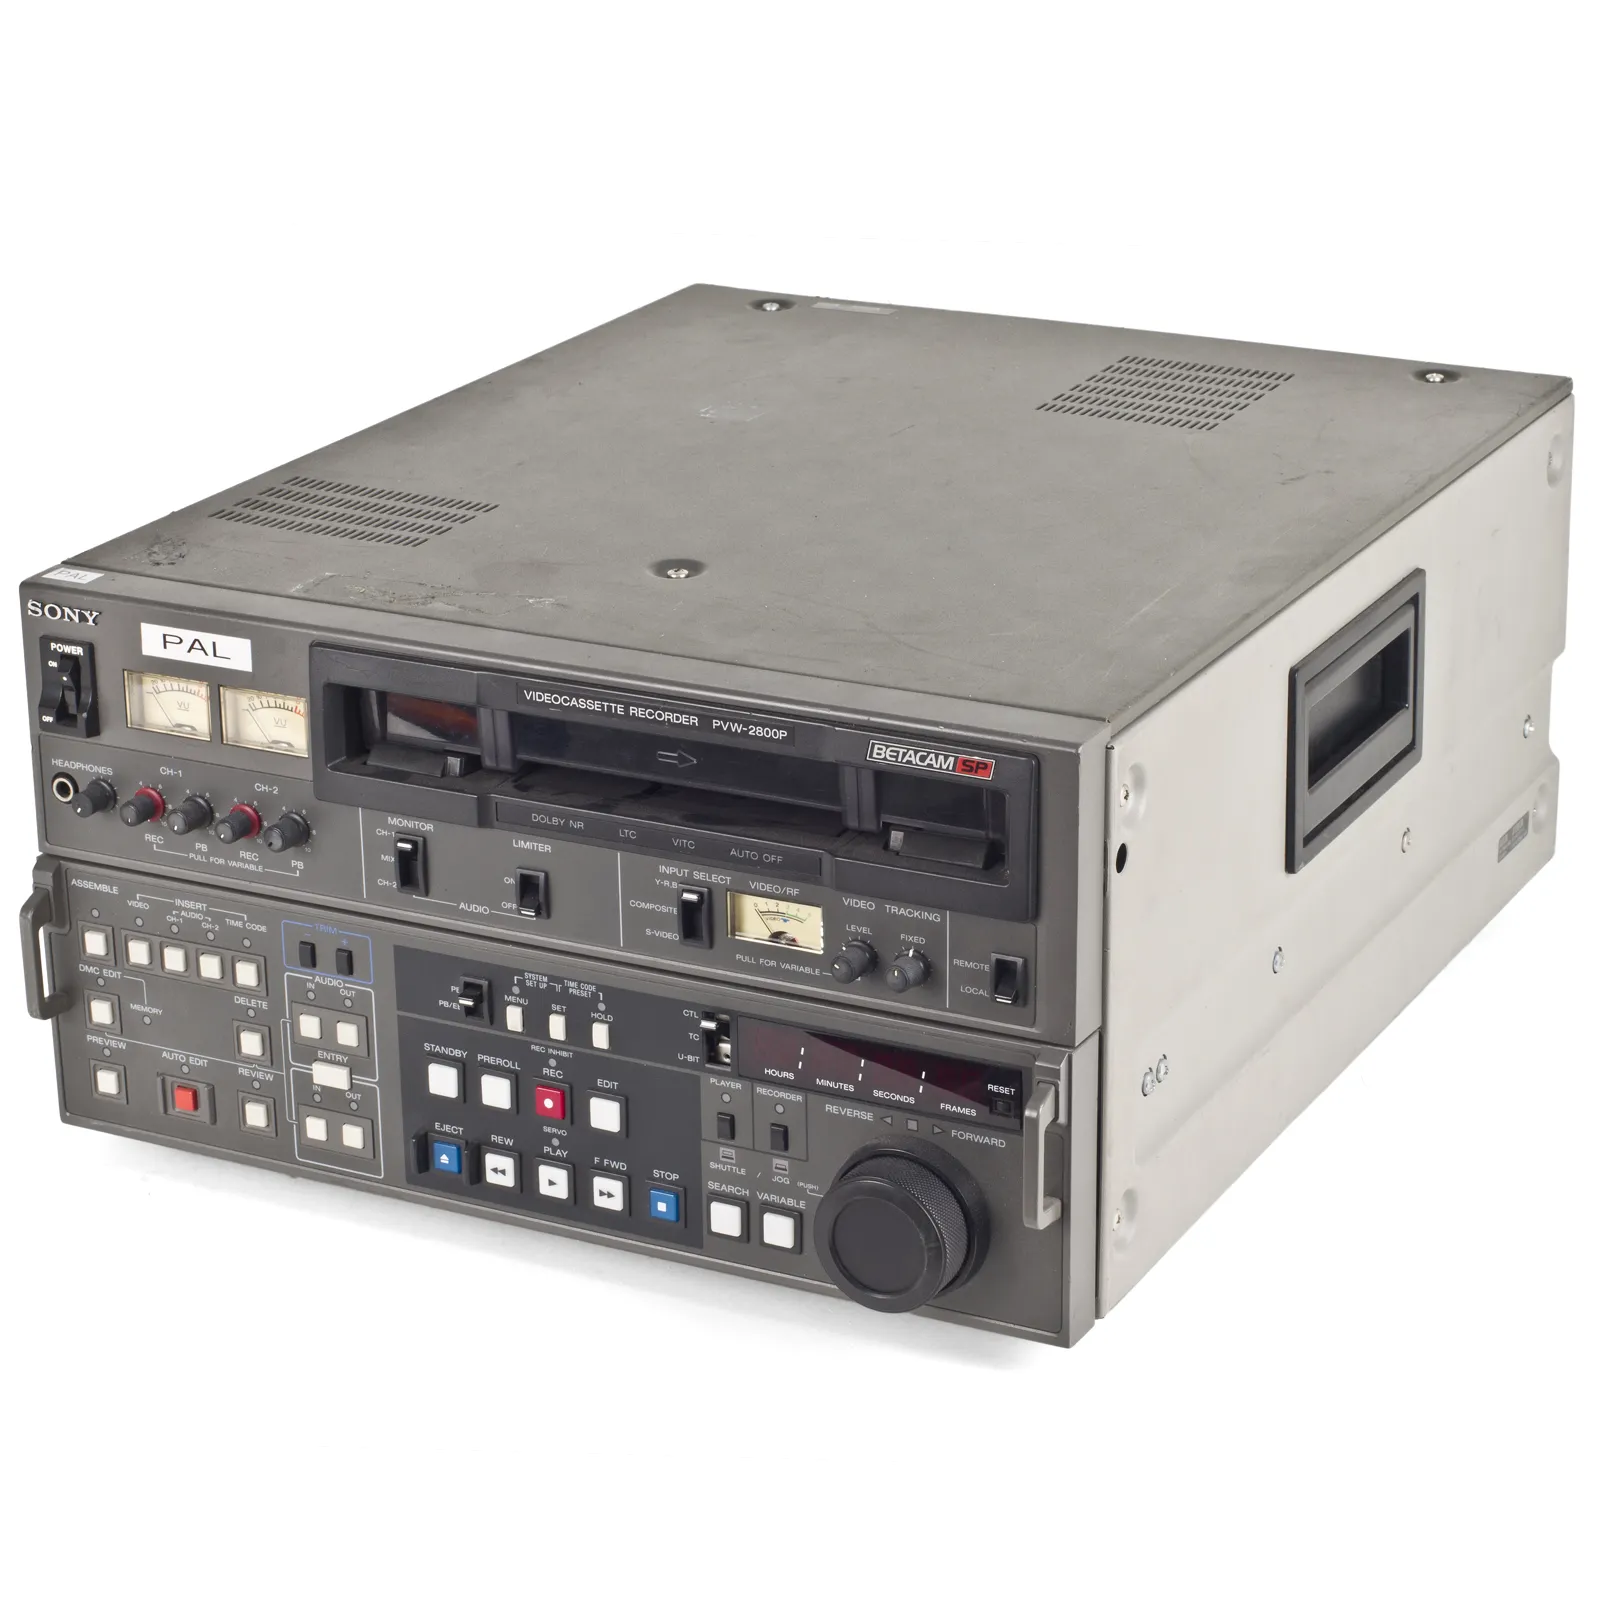 A SONY PVW 2800 video recorder with a cassette player and tape recorder.